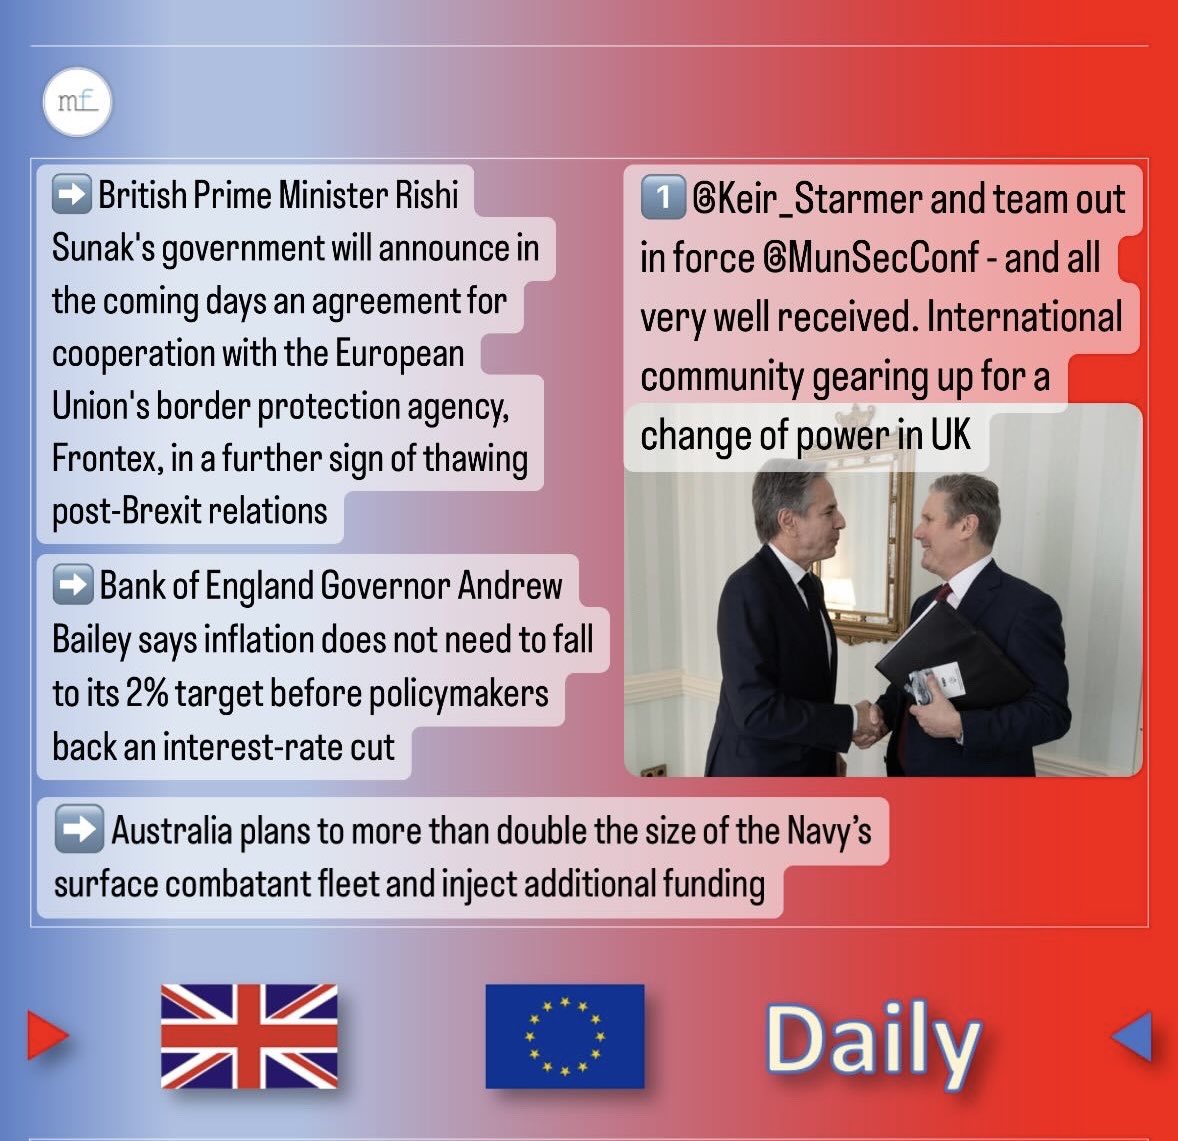 #Brexit daily #BrexitNews day 1️⃣1️⃣4️⃣6️⃣ #energytransition #trade #supplychain #business #logistics #Logistik #trade #export #import #customs #Finance #motionfinity #finances #financialservices #GDP #ukca #research #Science #space